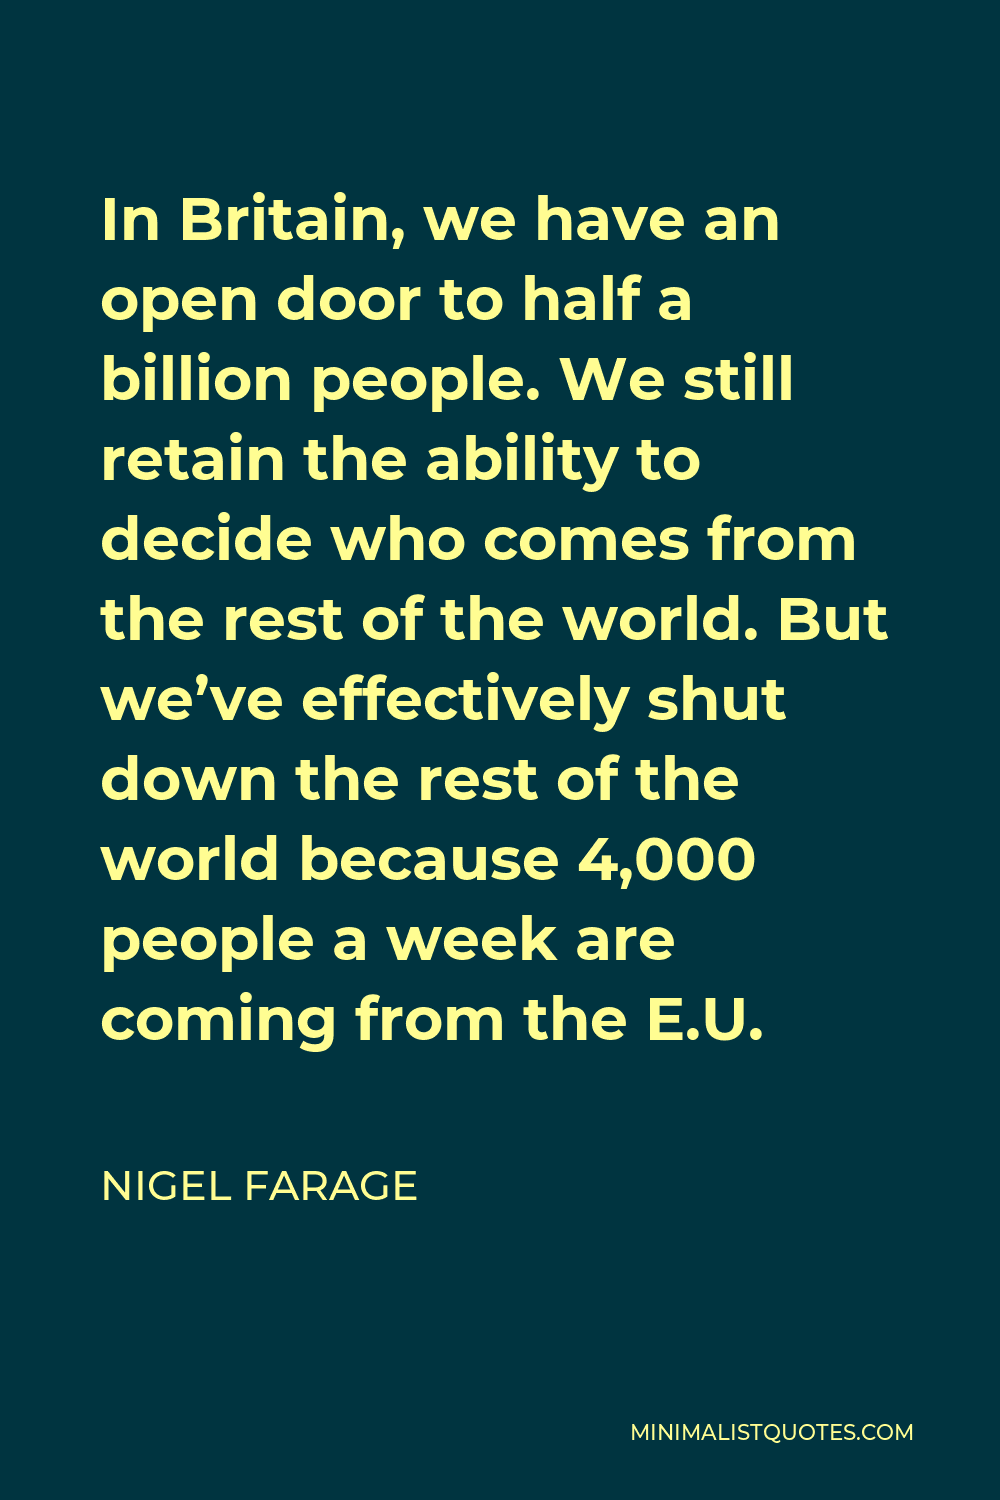 Nigel Farage Quote - In Britain, we have an open door to half a billion people. We still retain the ability to decide who comes from the rest of the world. But we’ve effectively shut down the rest of the world because 4,000 people a week are coming from the E.U.